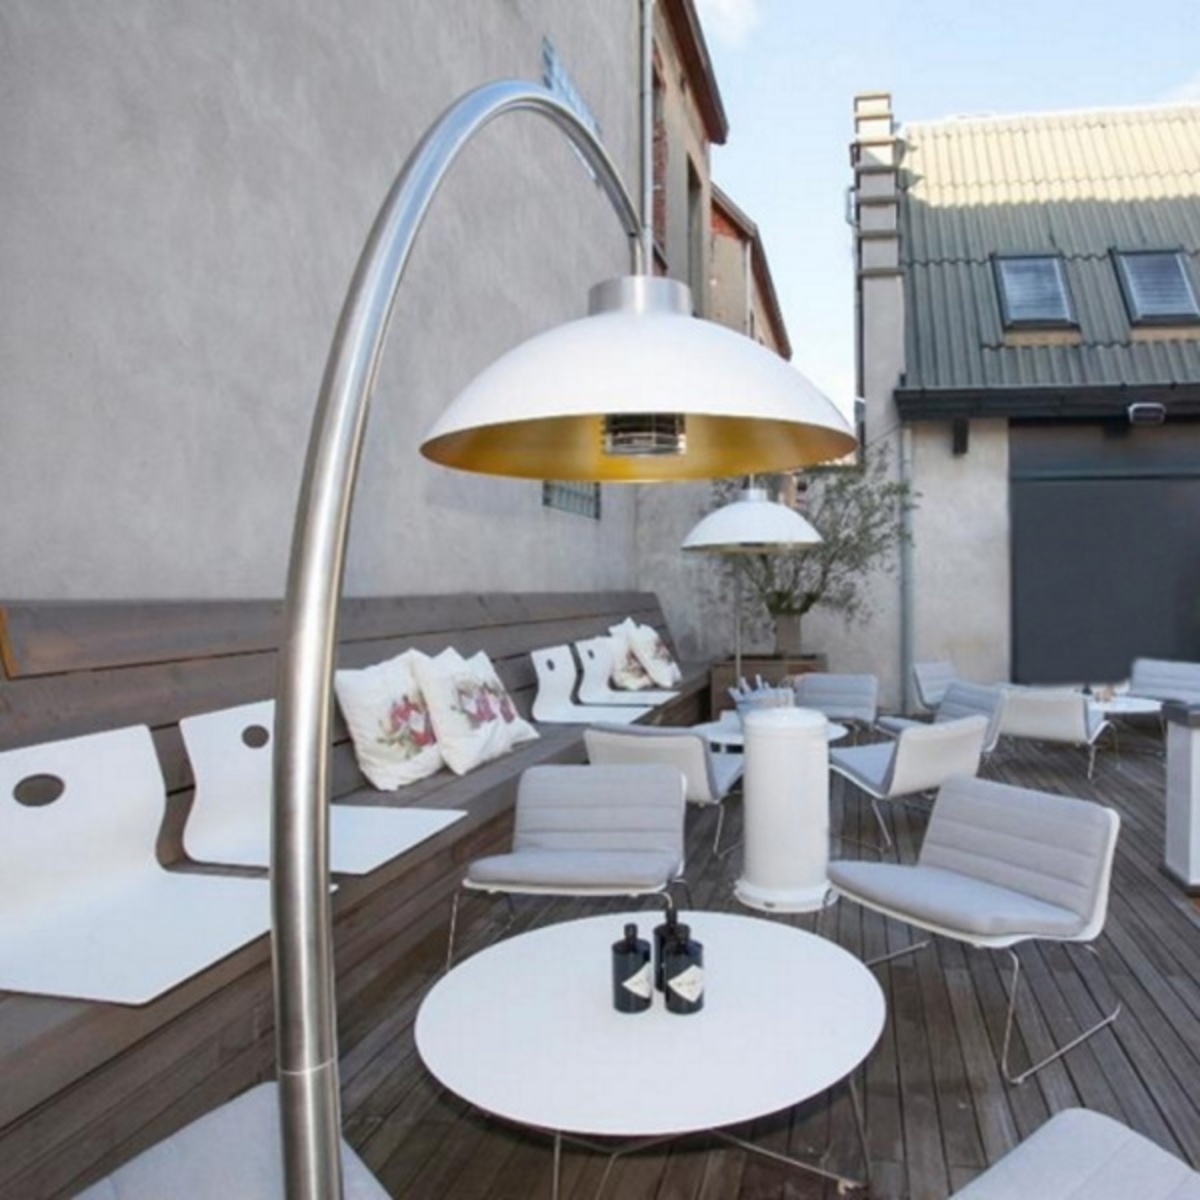 Heatsail Dome white electric patio heater on a rooftop